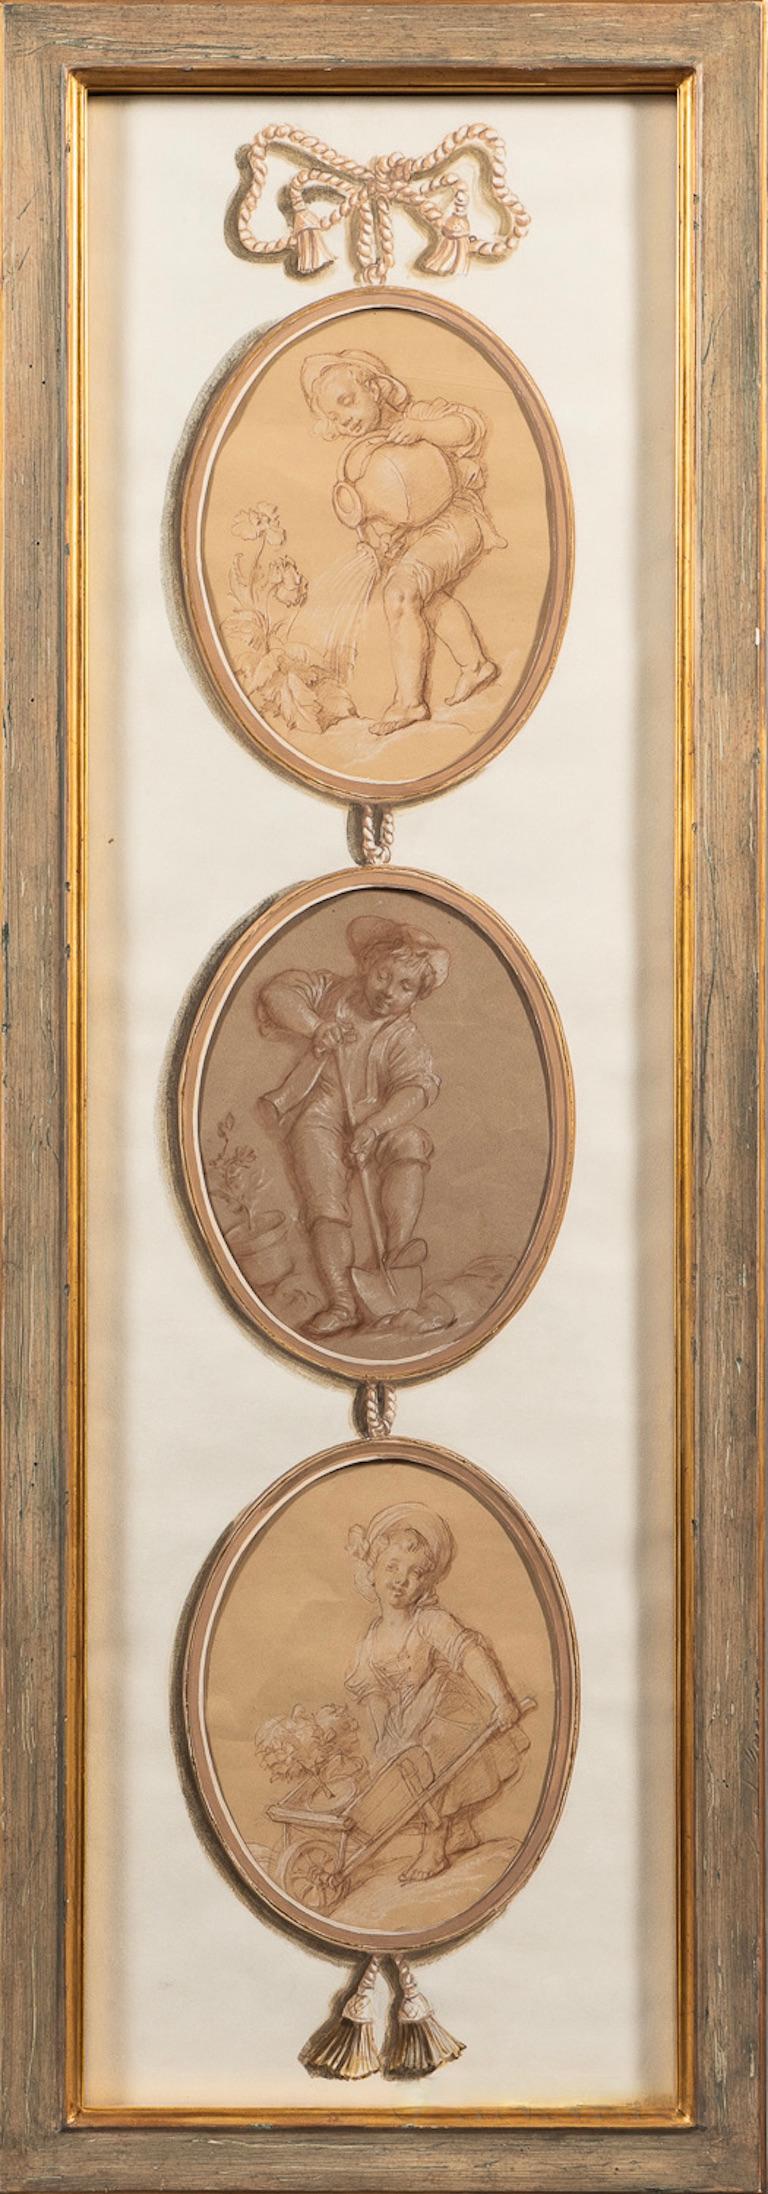 Pair of French 18th Century Old Master Style Drawings in Trompe l'Oeil  In Good Condition For Sale In Essex, MA